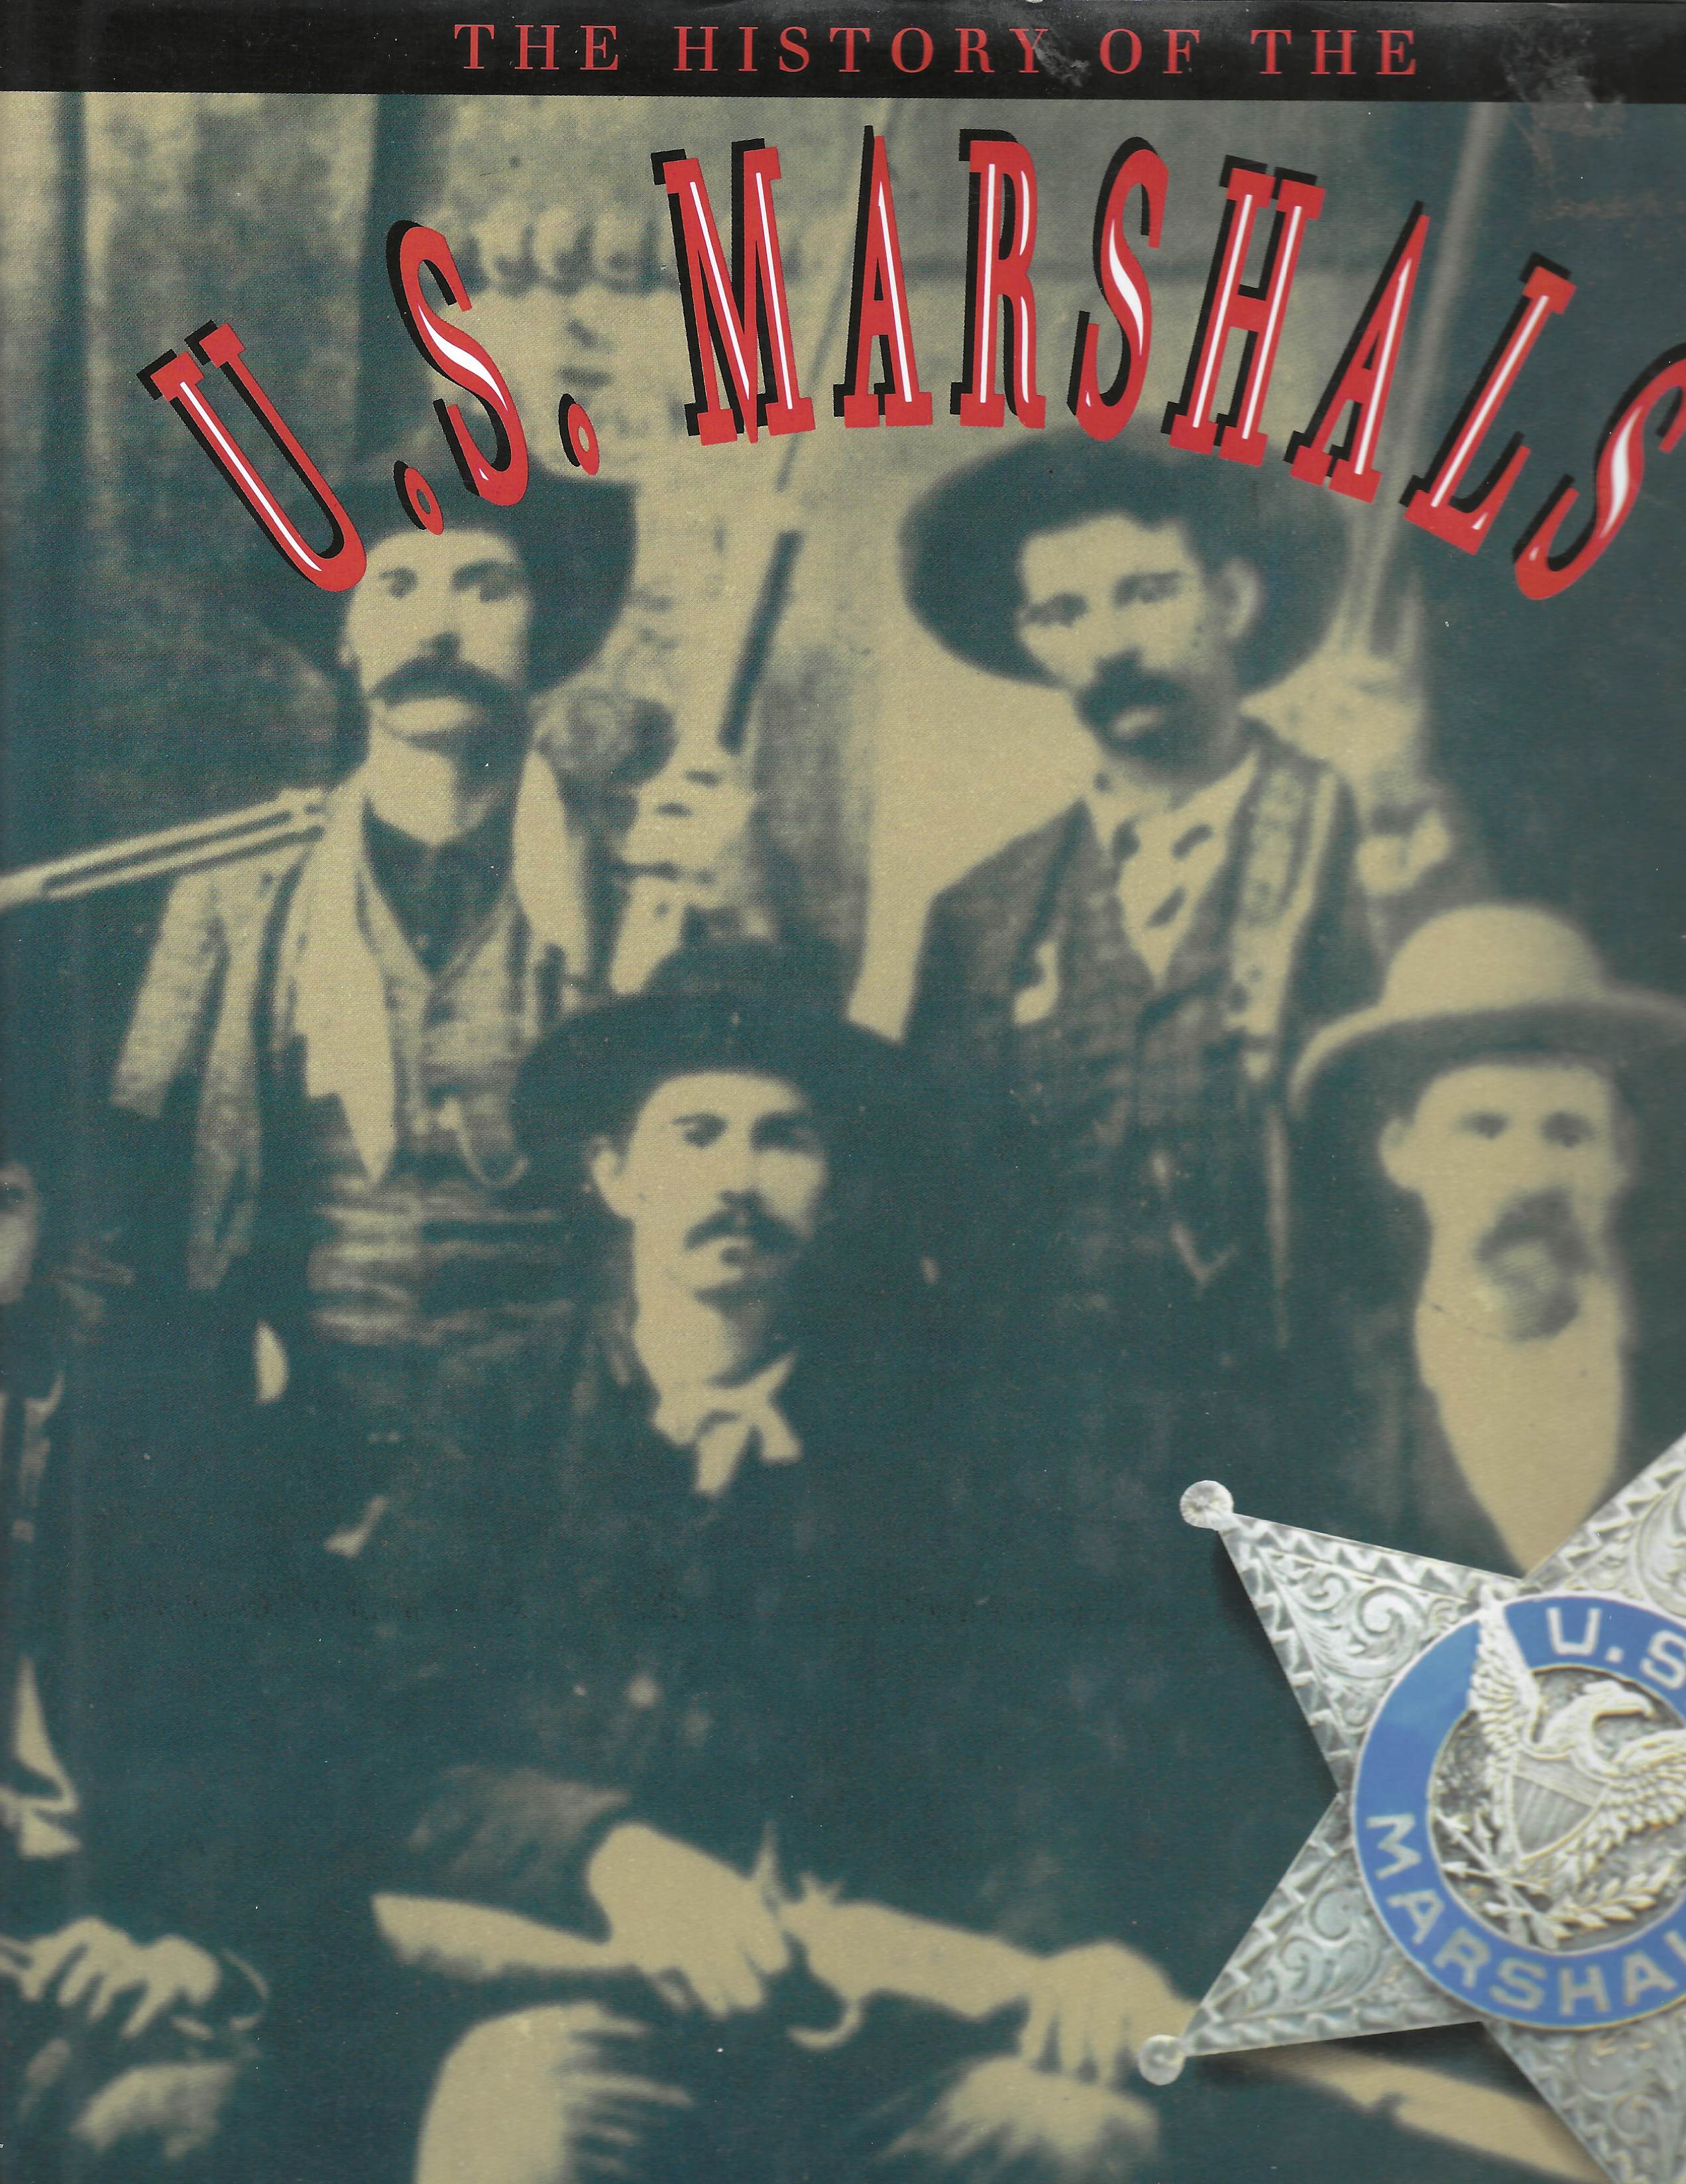 Dust jacket - The History of the U. S. Marshals by Robin Langley Sommer.